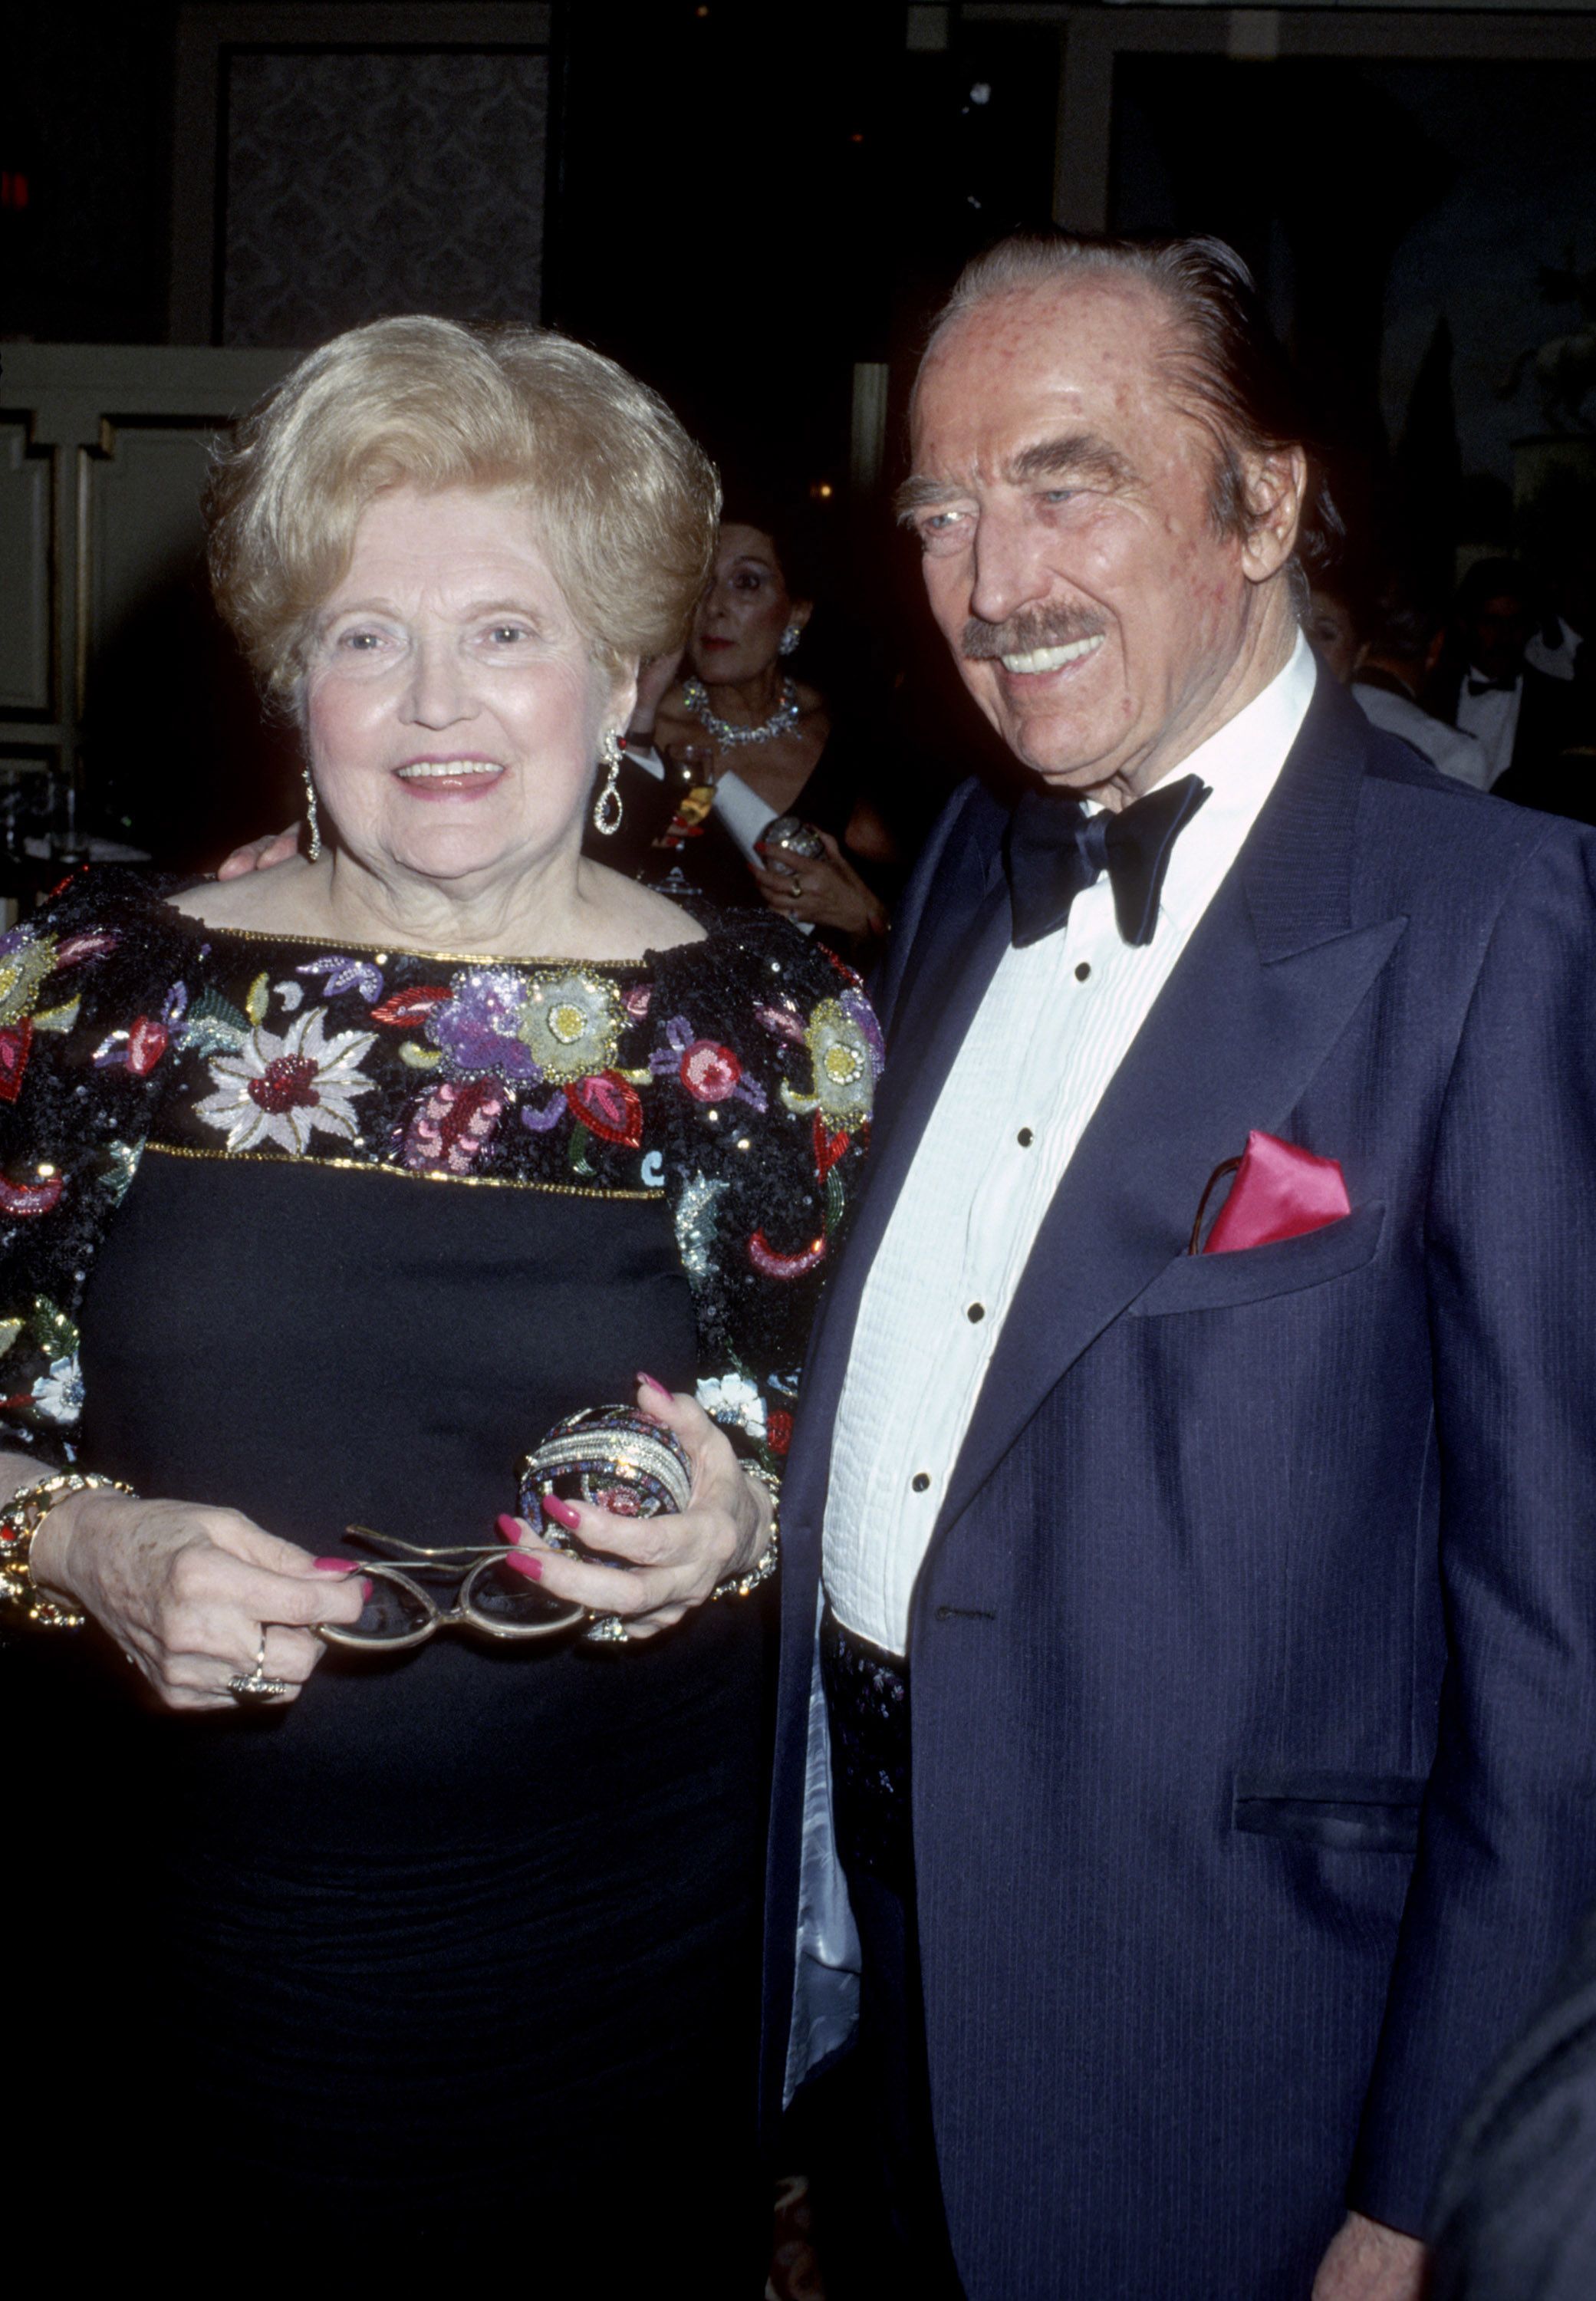 Mary Anne Trump MacLeod and Fred Trump attend the Police Athletic League dinner honoring Donald Trump at the Plaza Hotel in May 1989 in New York | Source: Getty Images